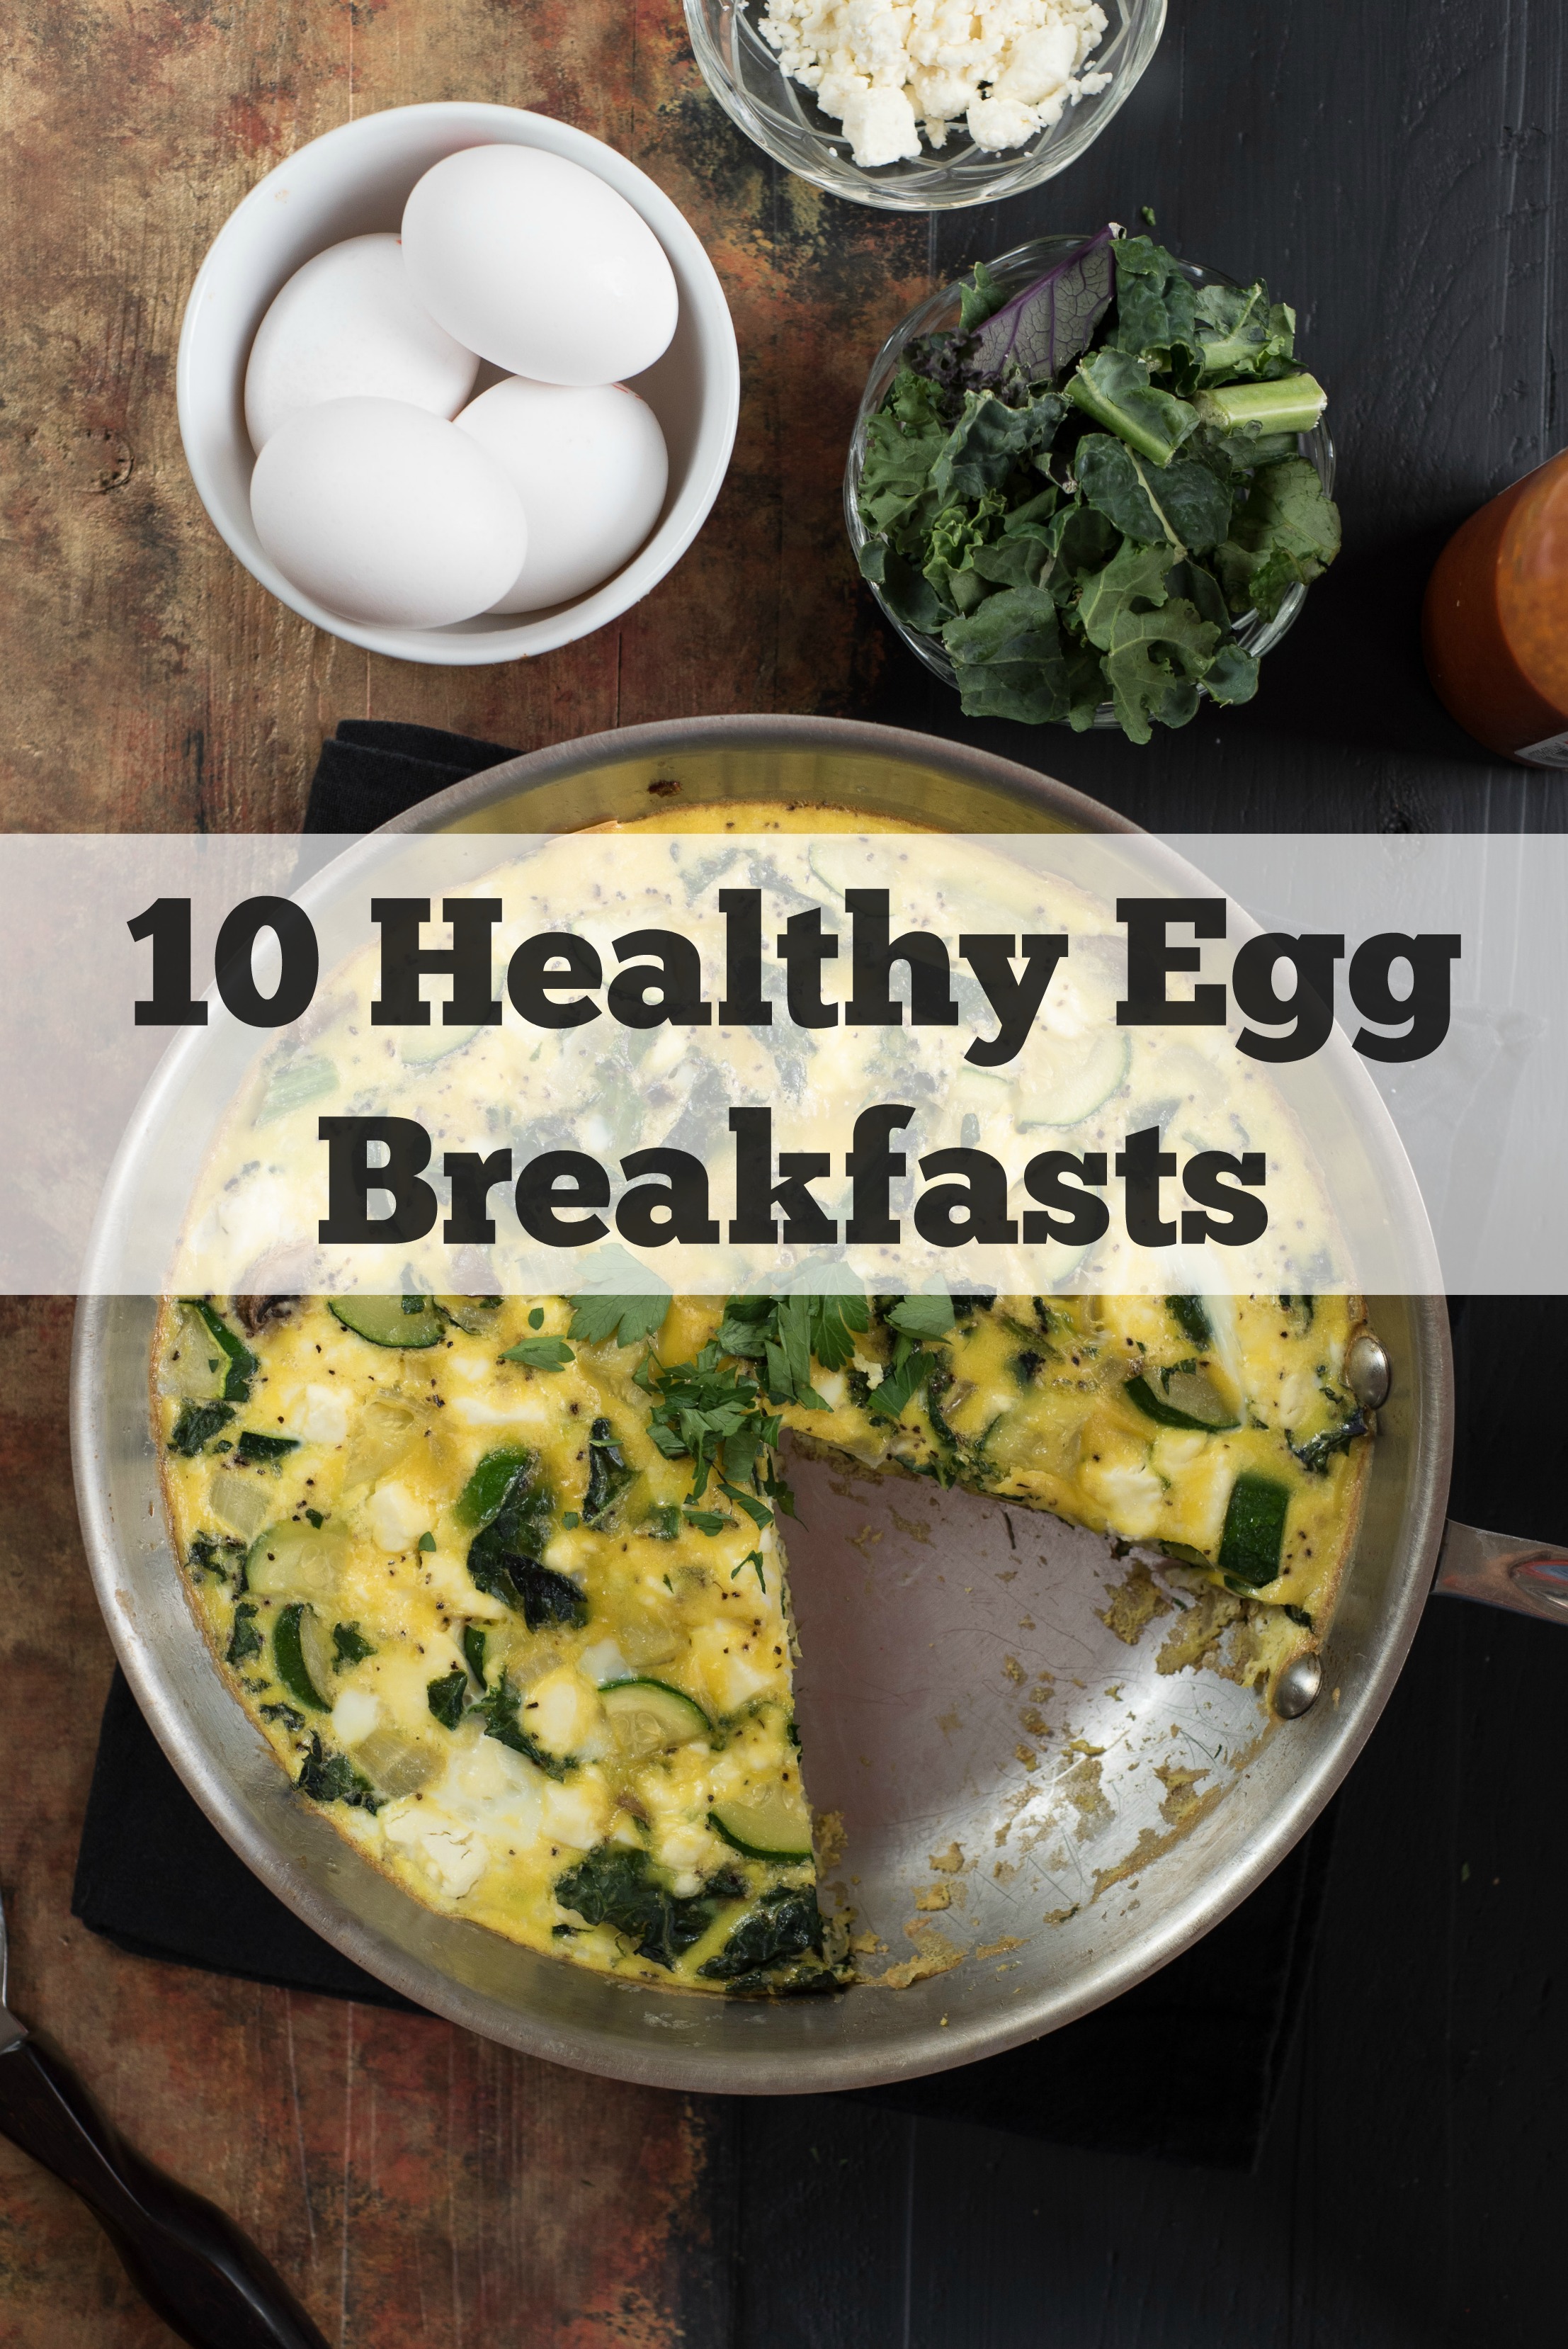 10 Healthy Egg Breakfasts- bored with scrambled or fried eggs? Here are some other ideas to get you excited about breakfast! | Nutritious Eats